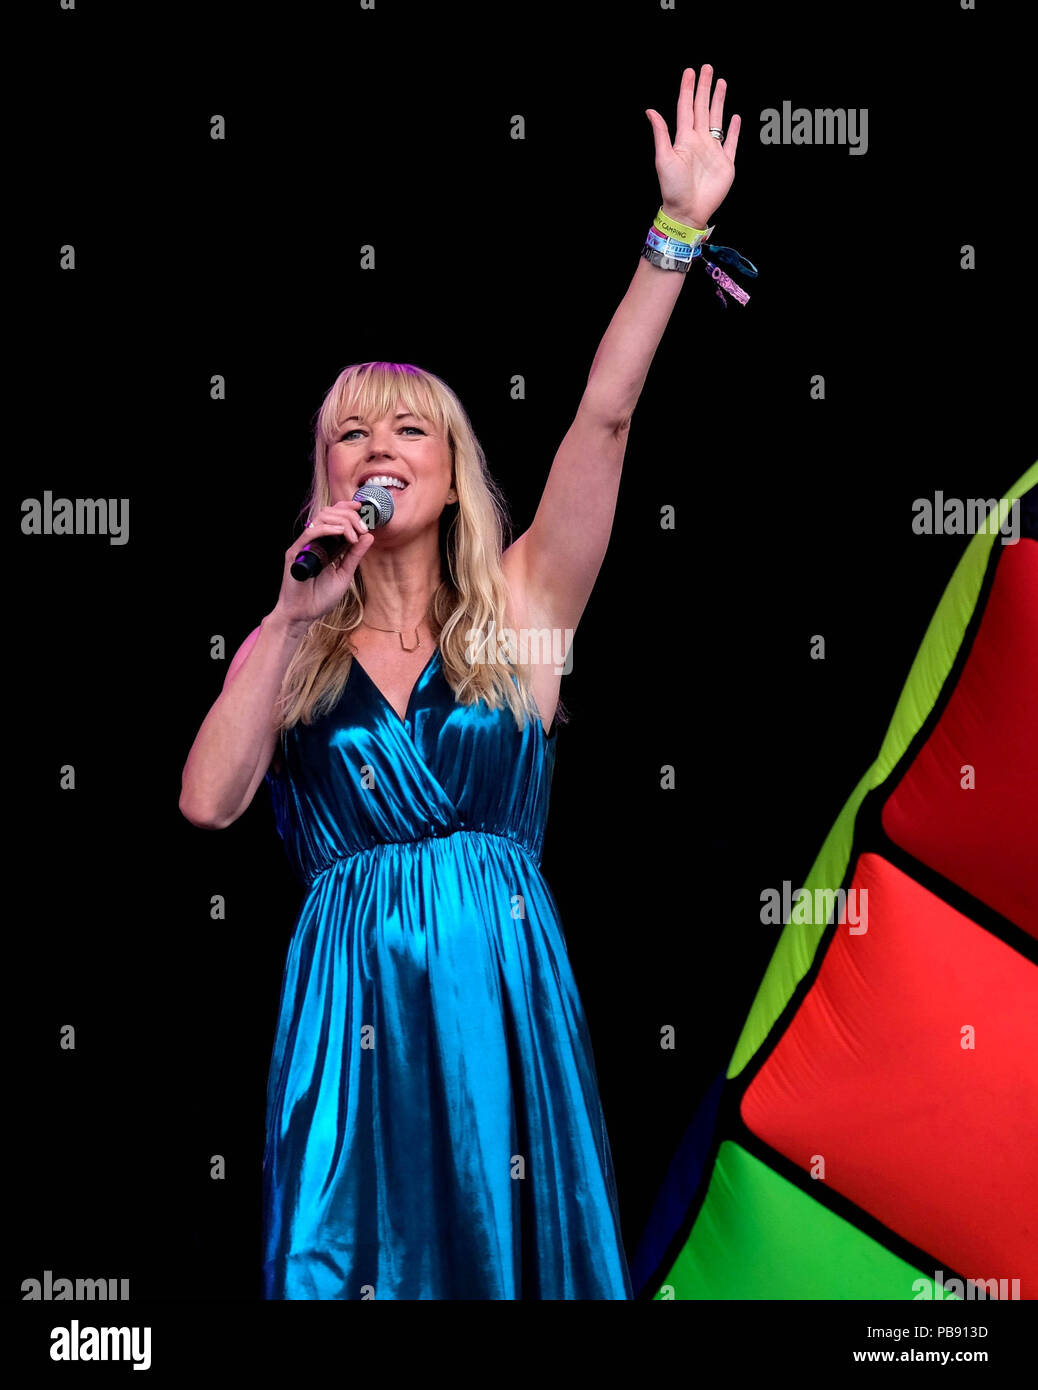 Camp Bestival Festival Day 1 -  July 27th 2018.  Sara Cox  Presents Just Can't Get Enough 80s, performing on stage, Lulworth, Dorset, UK Stock Photo